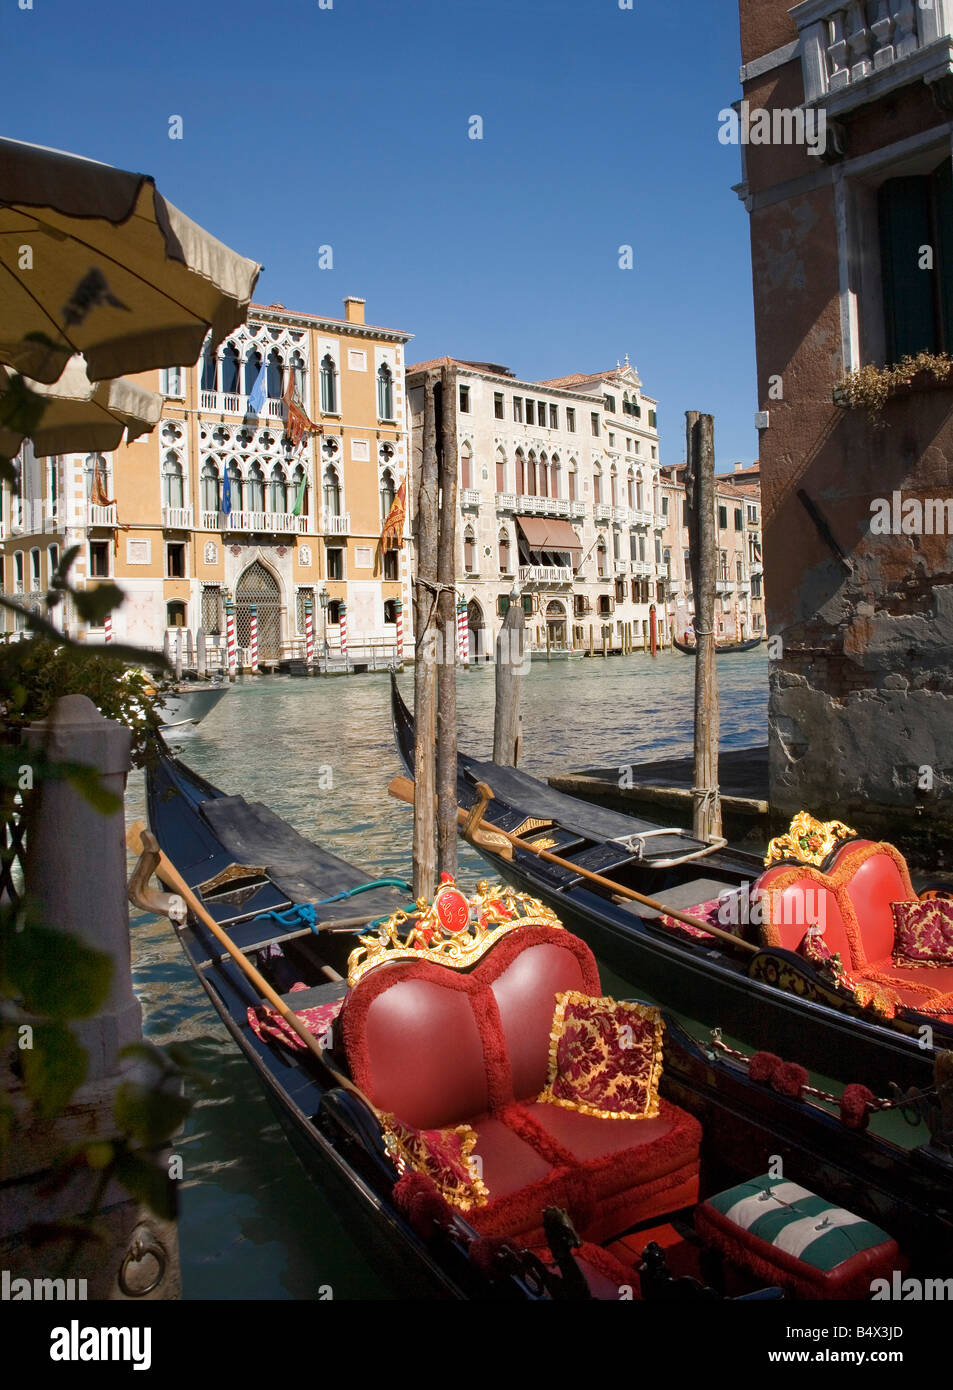 Gondolas moored on the Grand Canal in Venice Stock Photo